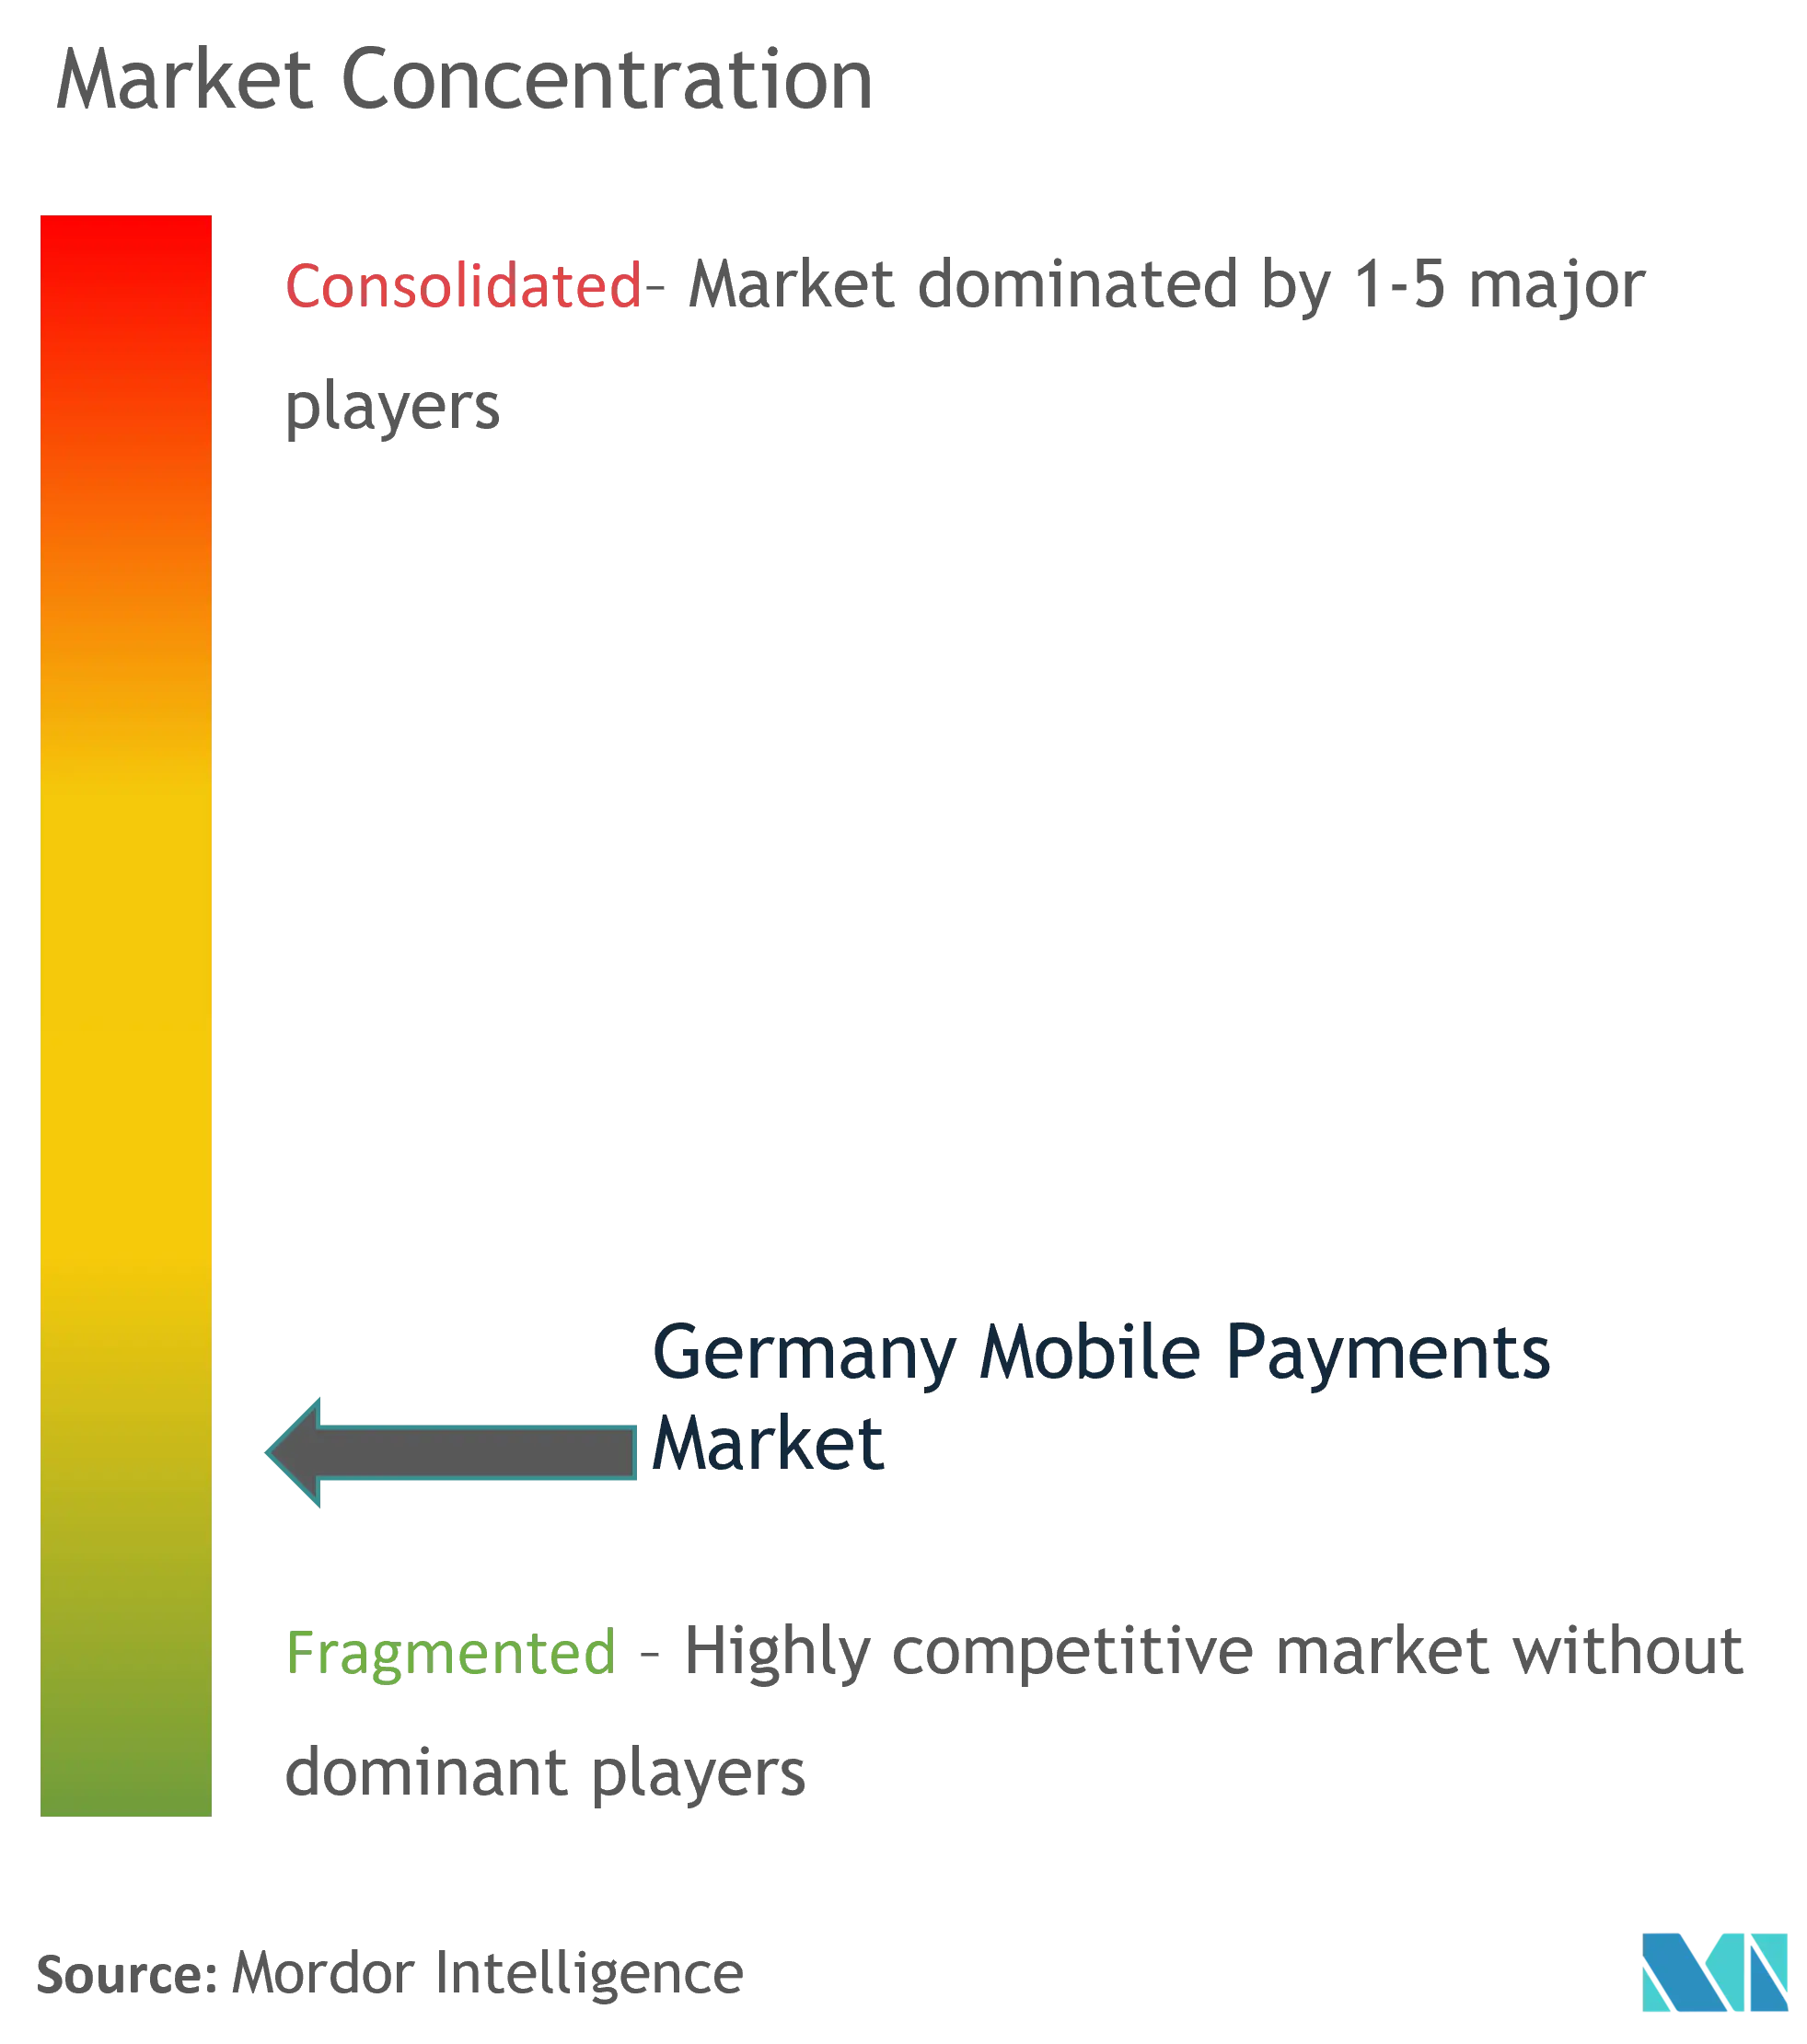 Germany Mobile Payments Market Concentration